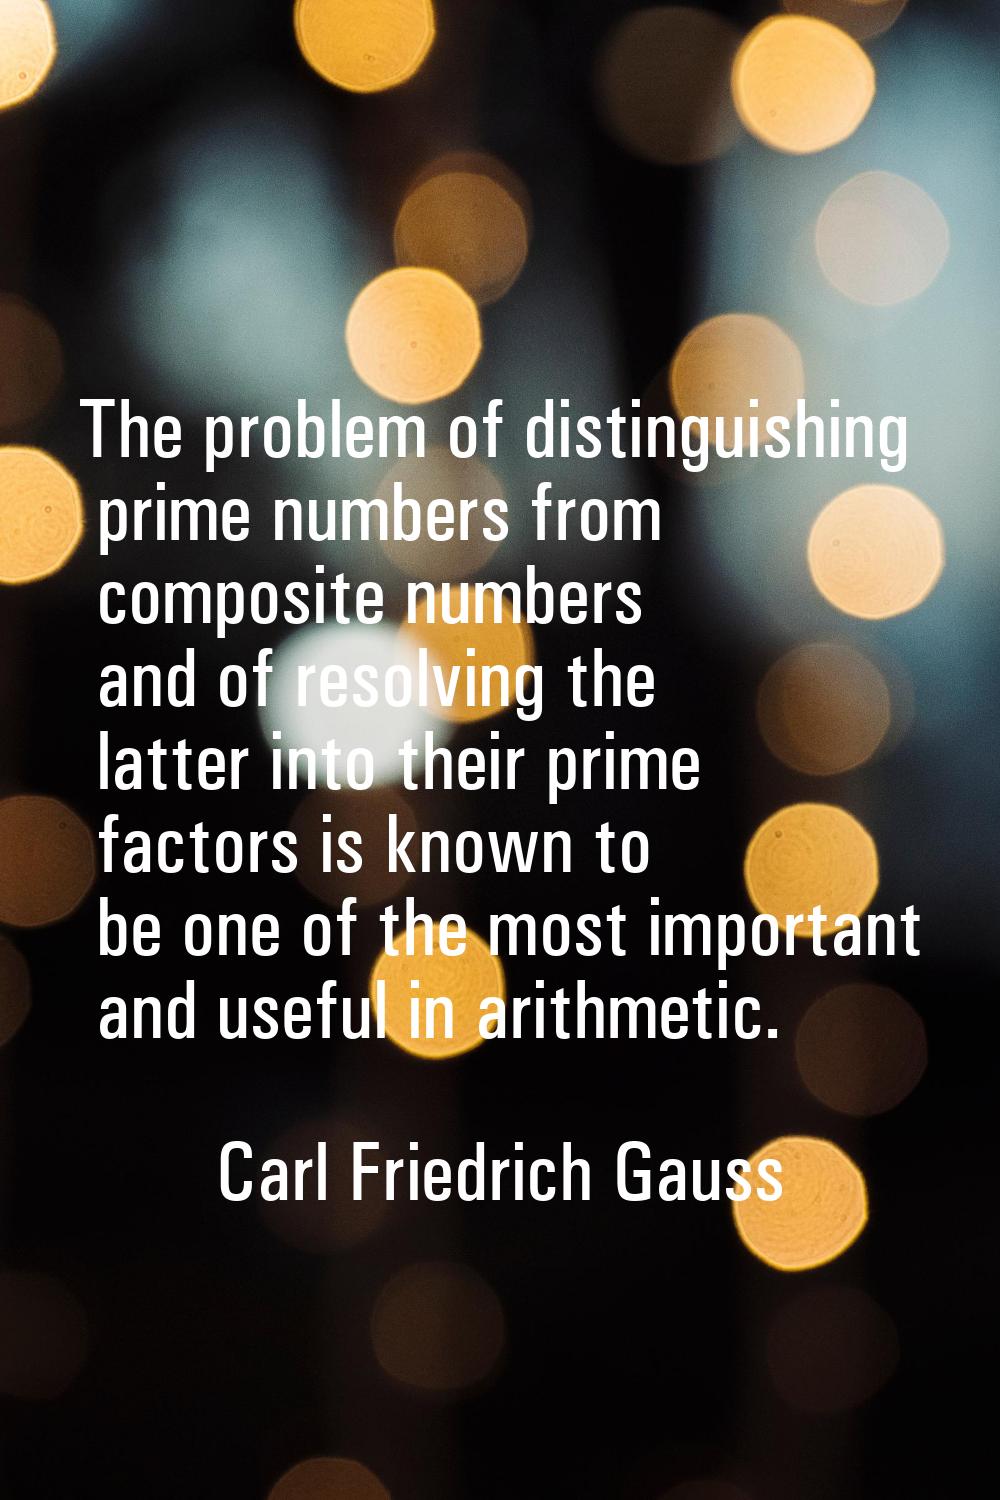 The problem of distinguishing prime numbers from composite numbers and of resolving the latter into